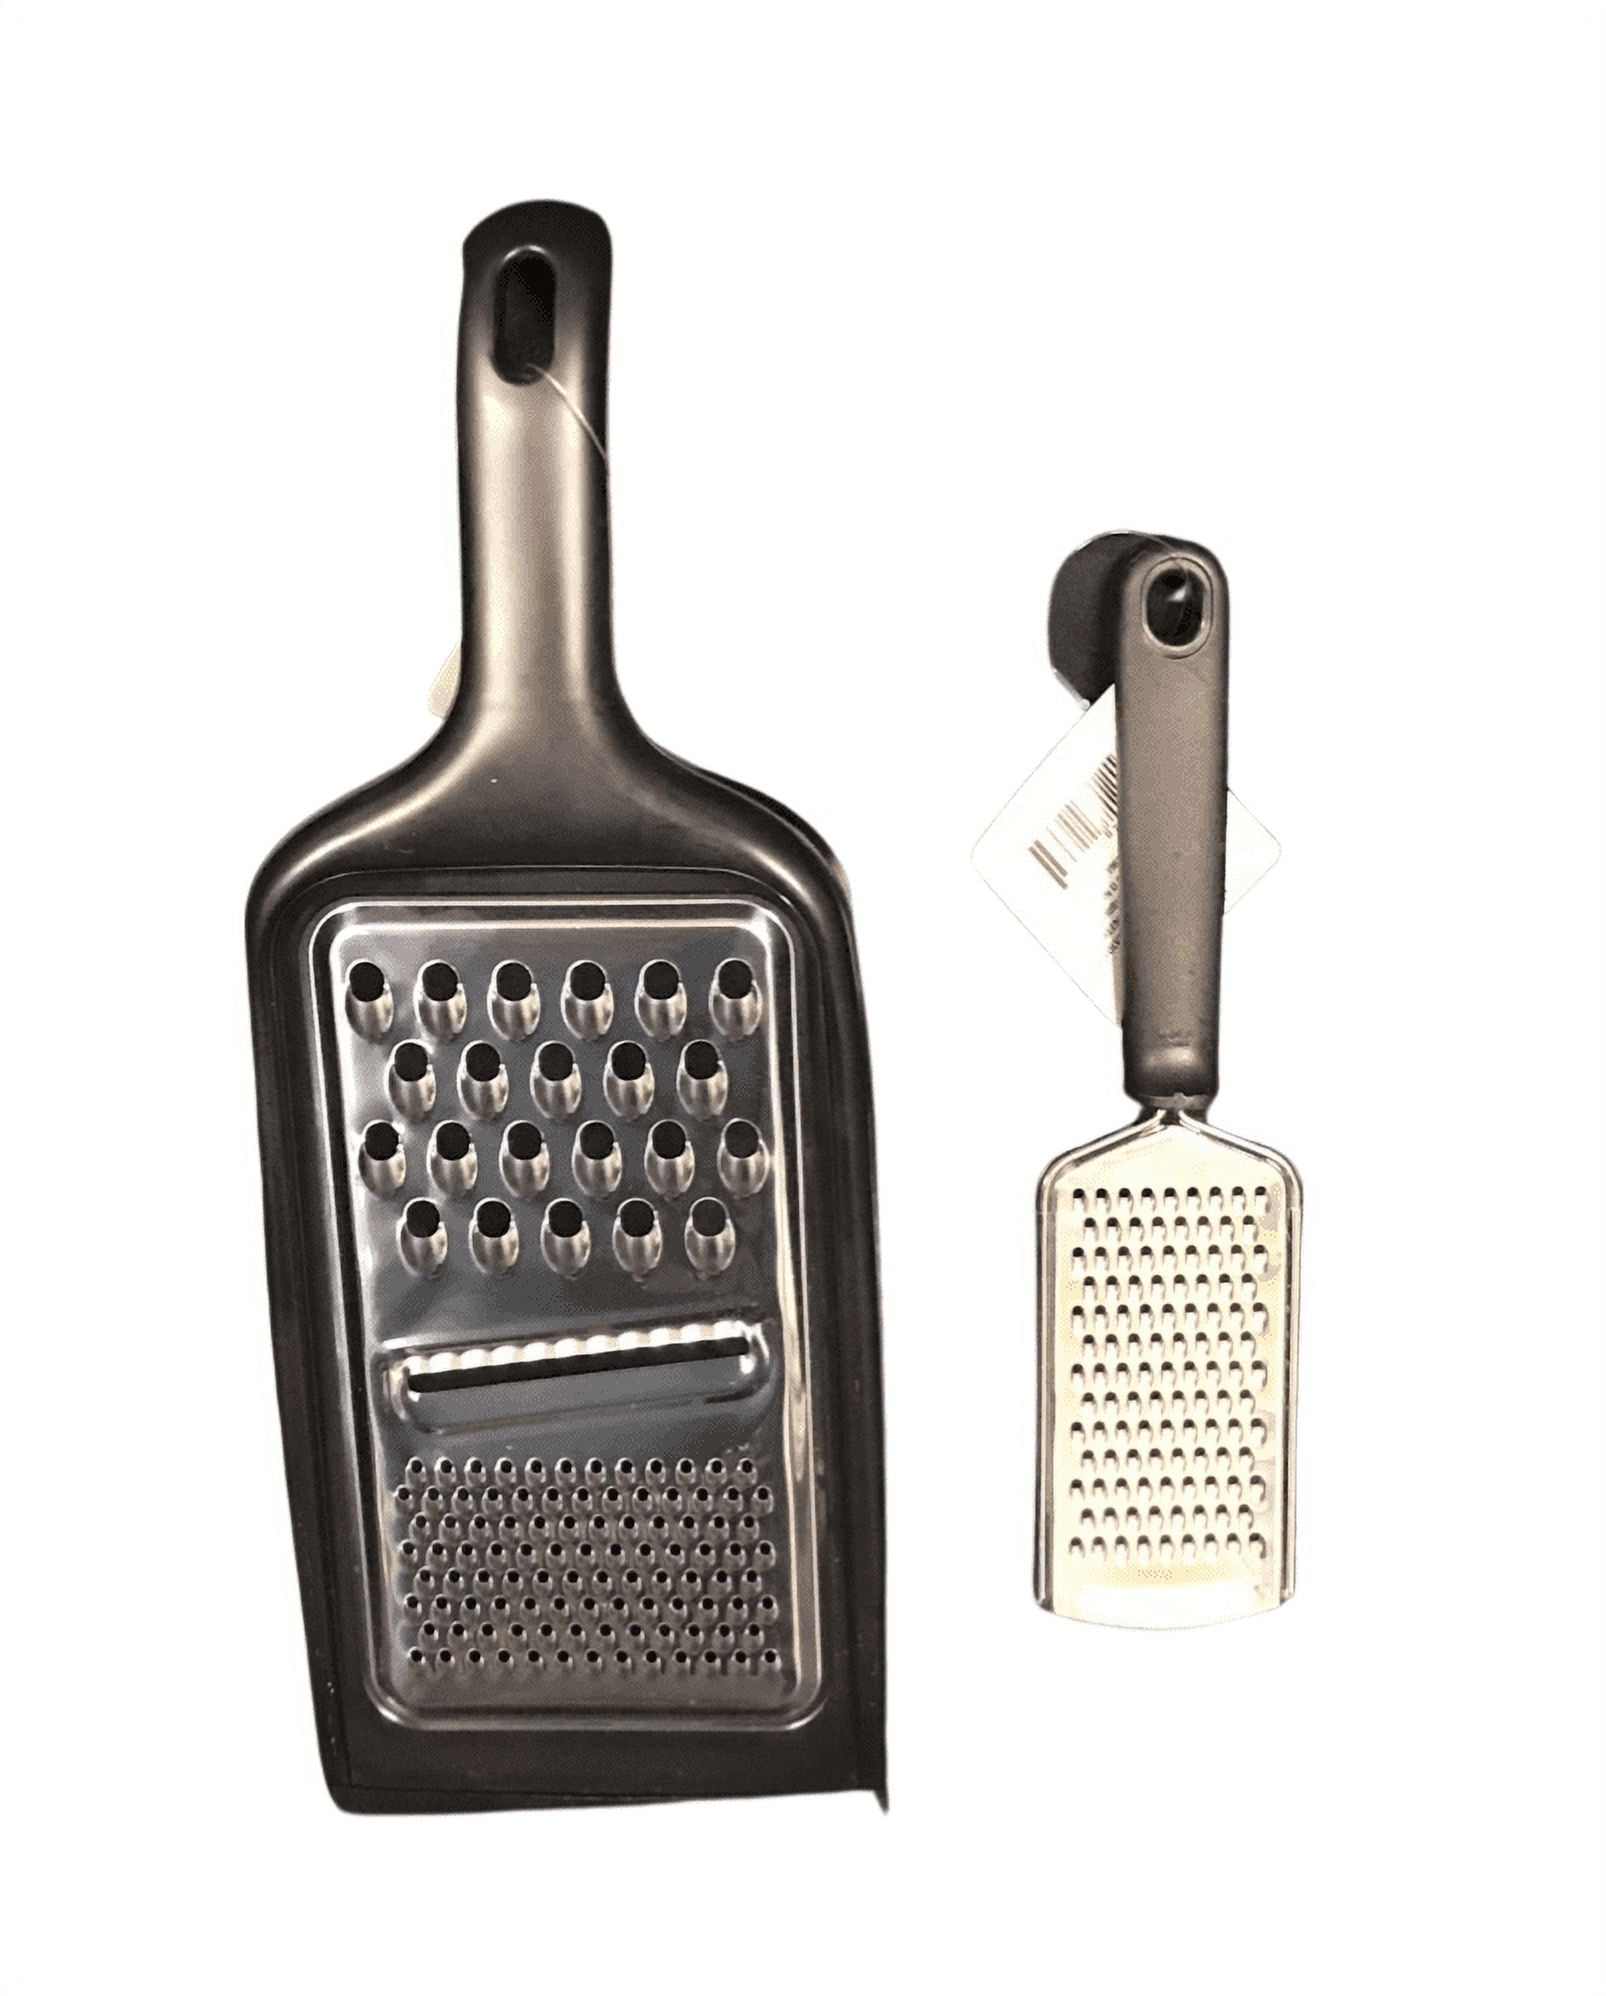 Kitcheniva Stainless Steel 3 in 1 Cheese Grater With Container And